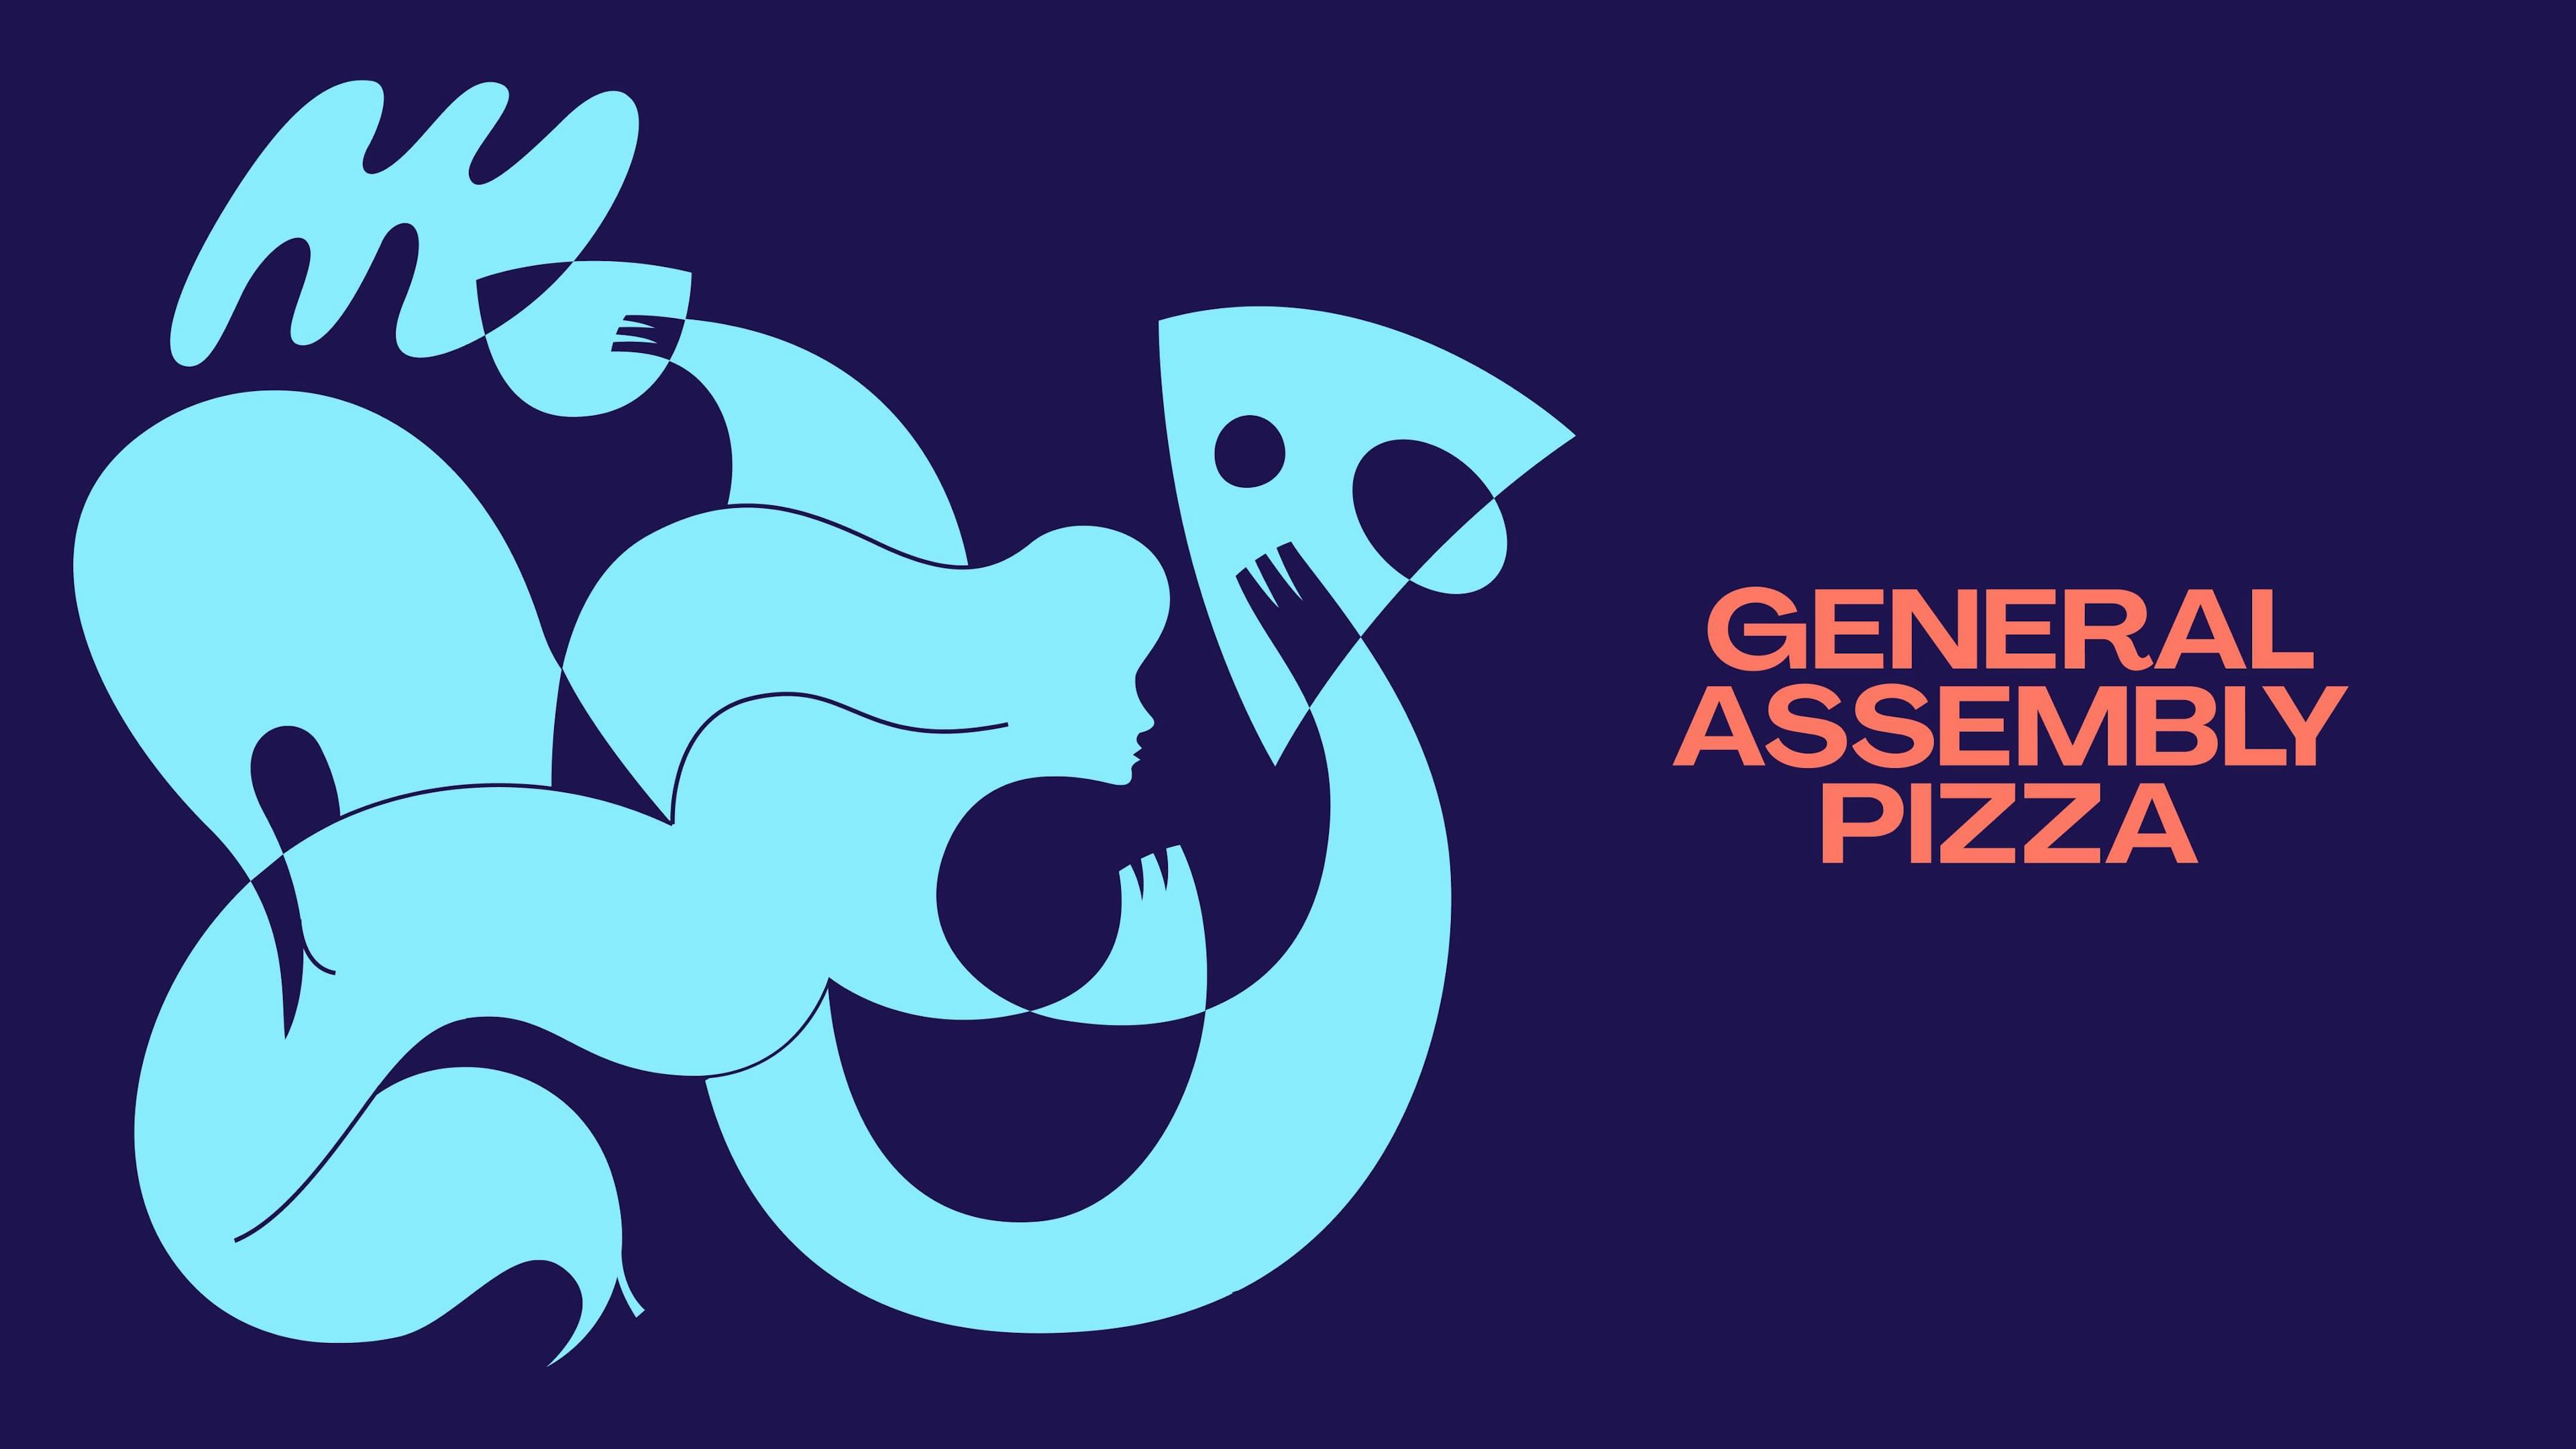 Brand identity for General Assembly Pizza.